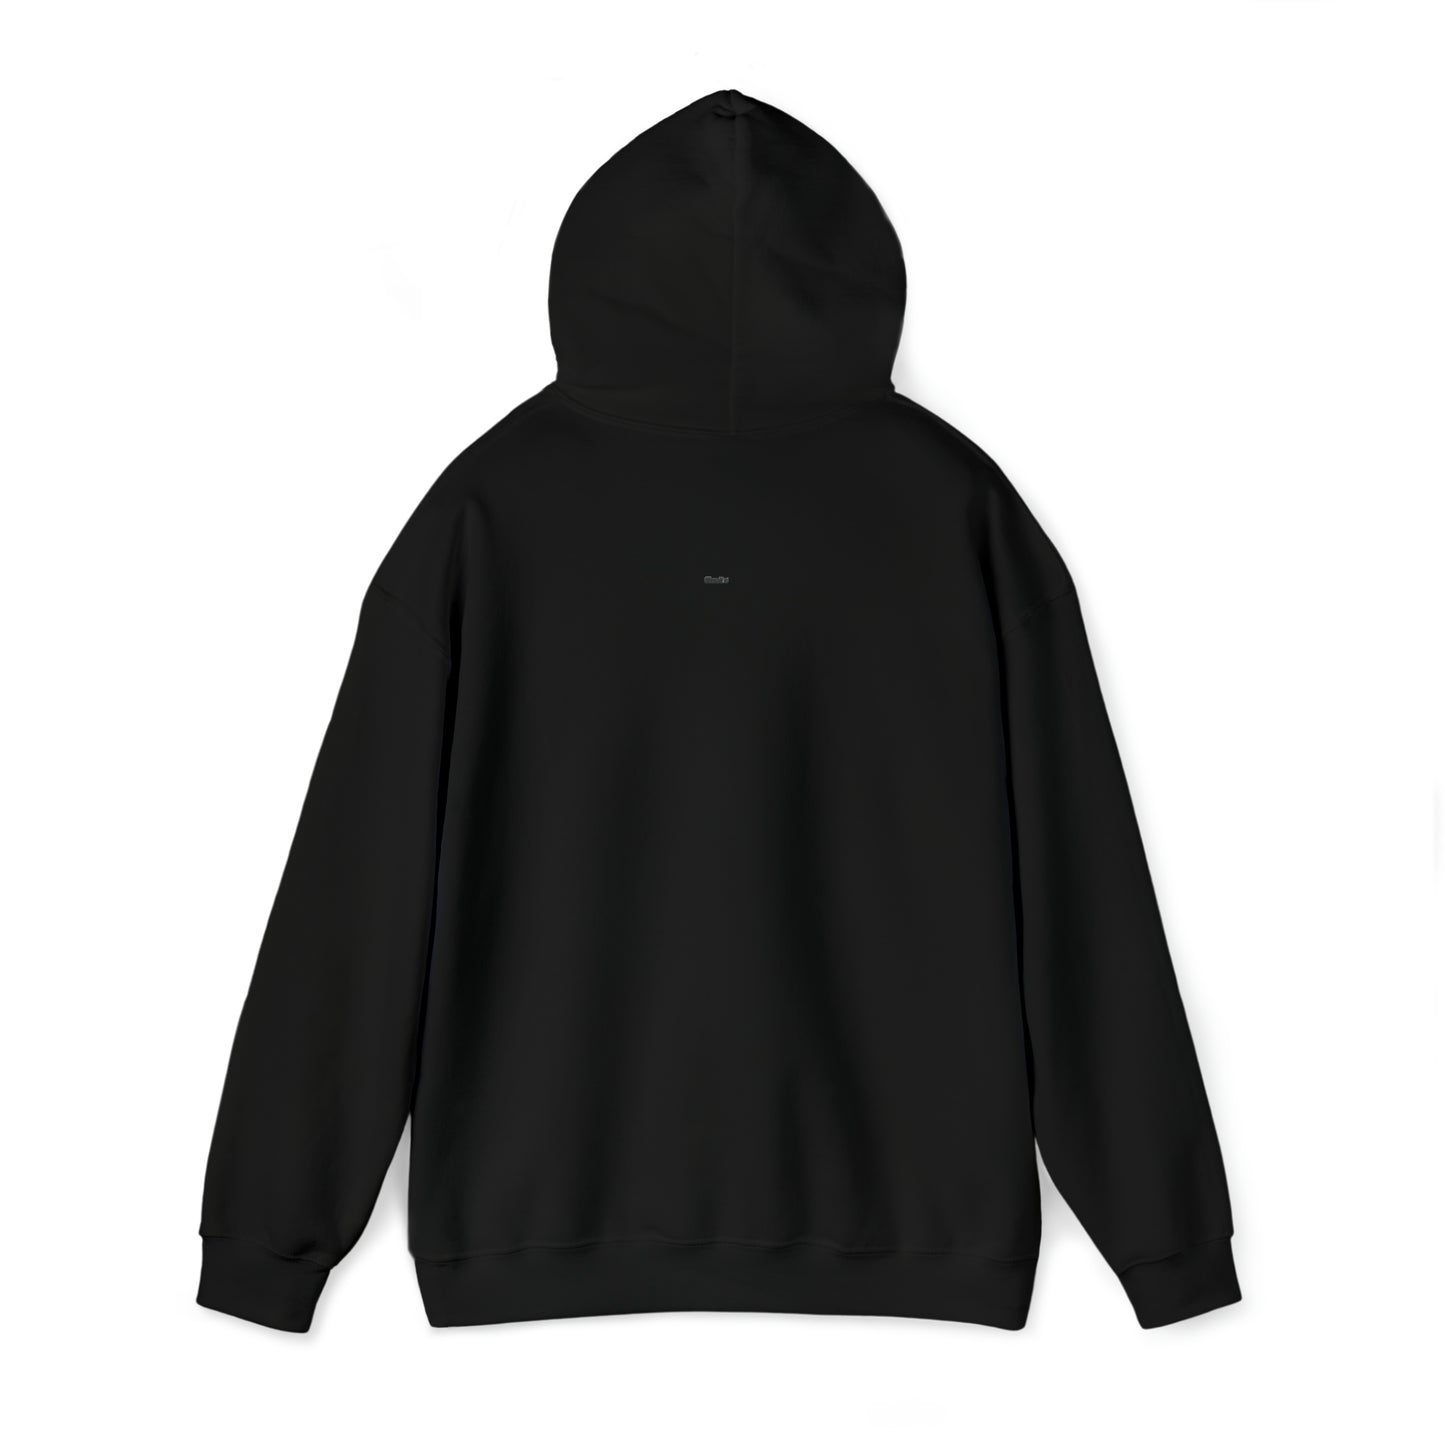 Showtie Custom Hoodie  Front and back(Black)